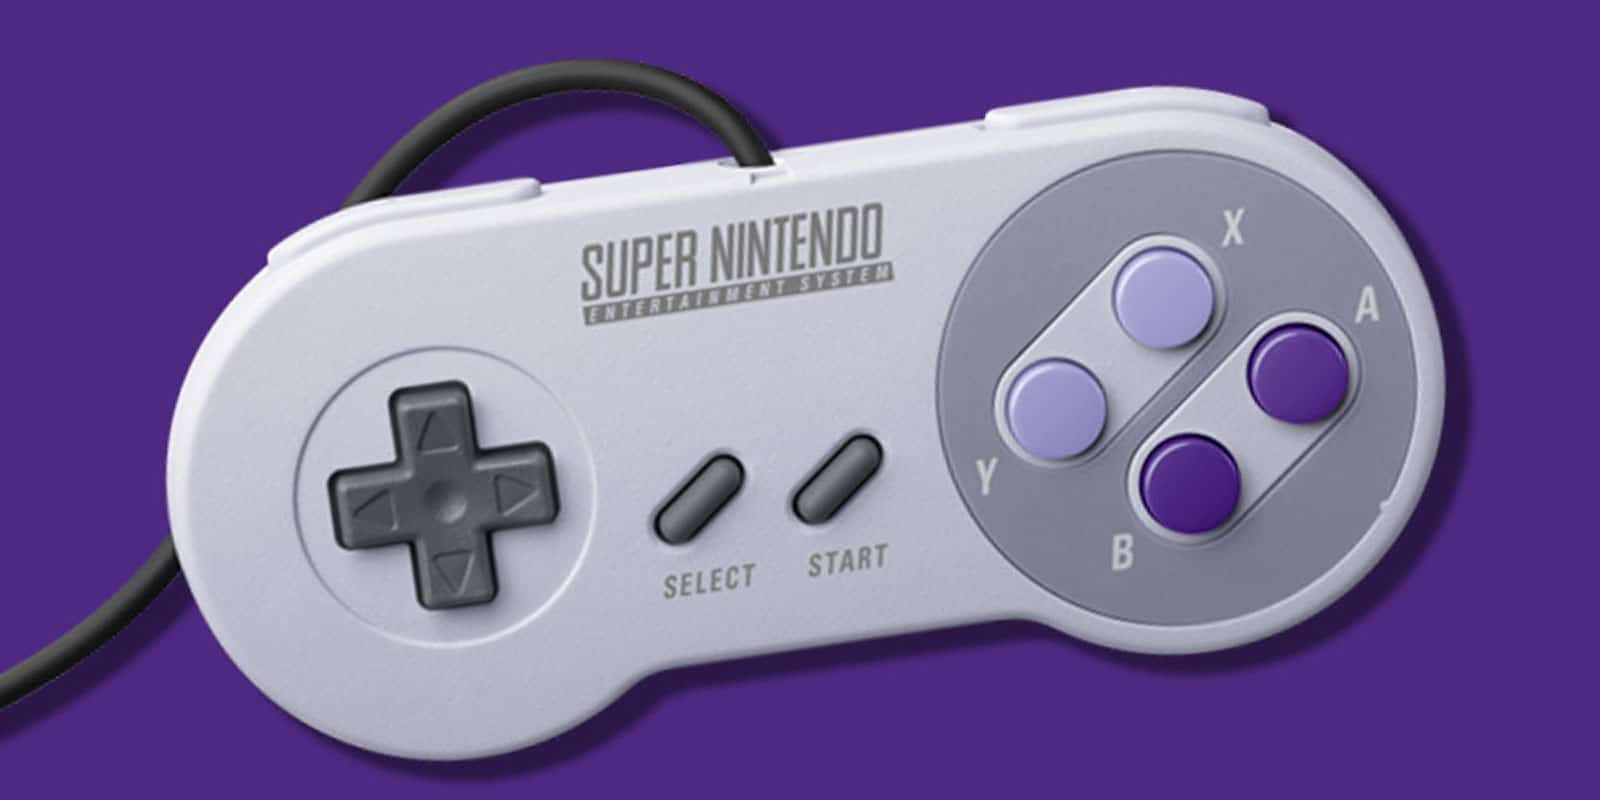 Now's your chance to win a Super NES Classic, loaded with 20 genre-defining games and endless hours of nostalgia.